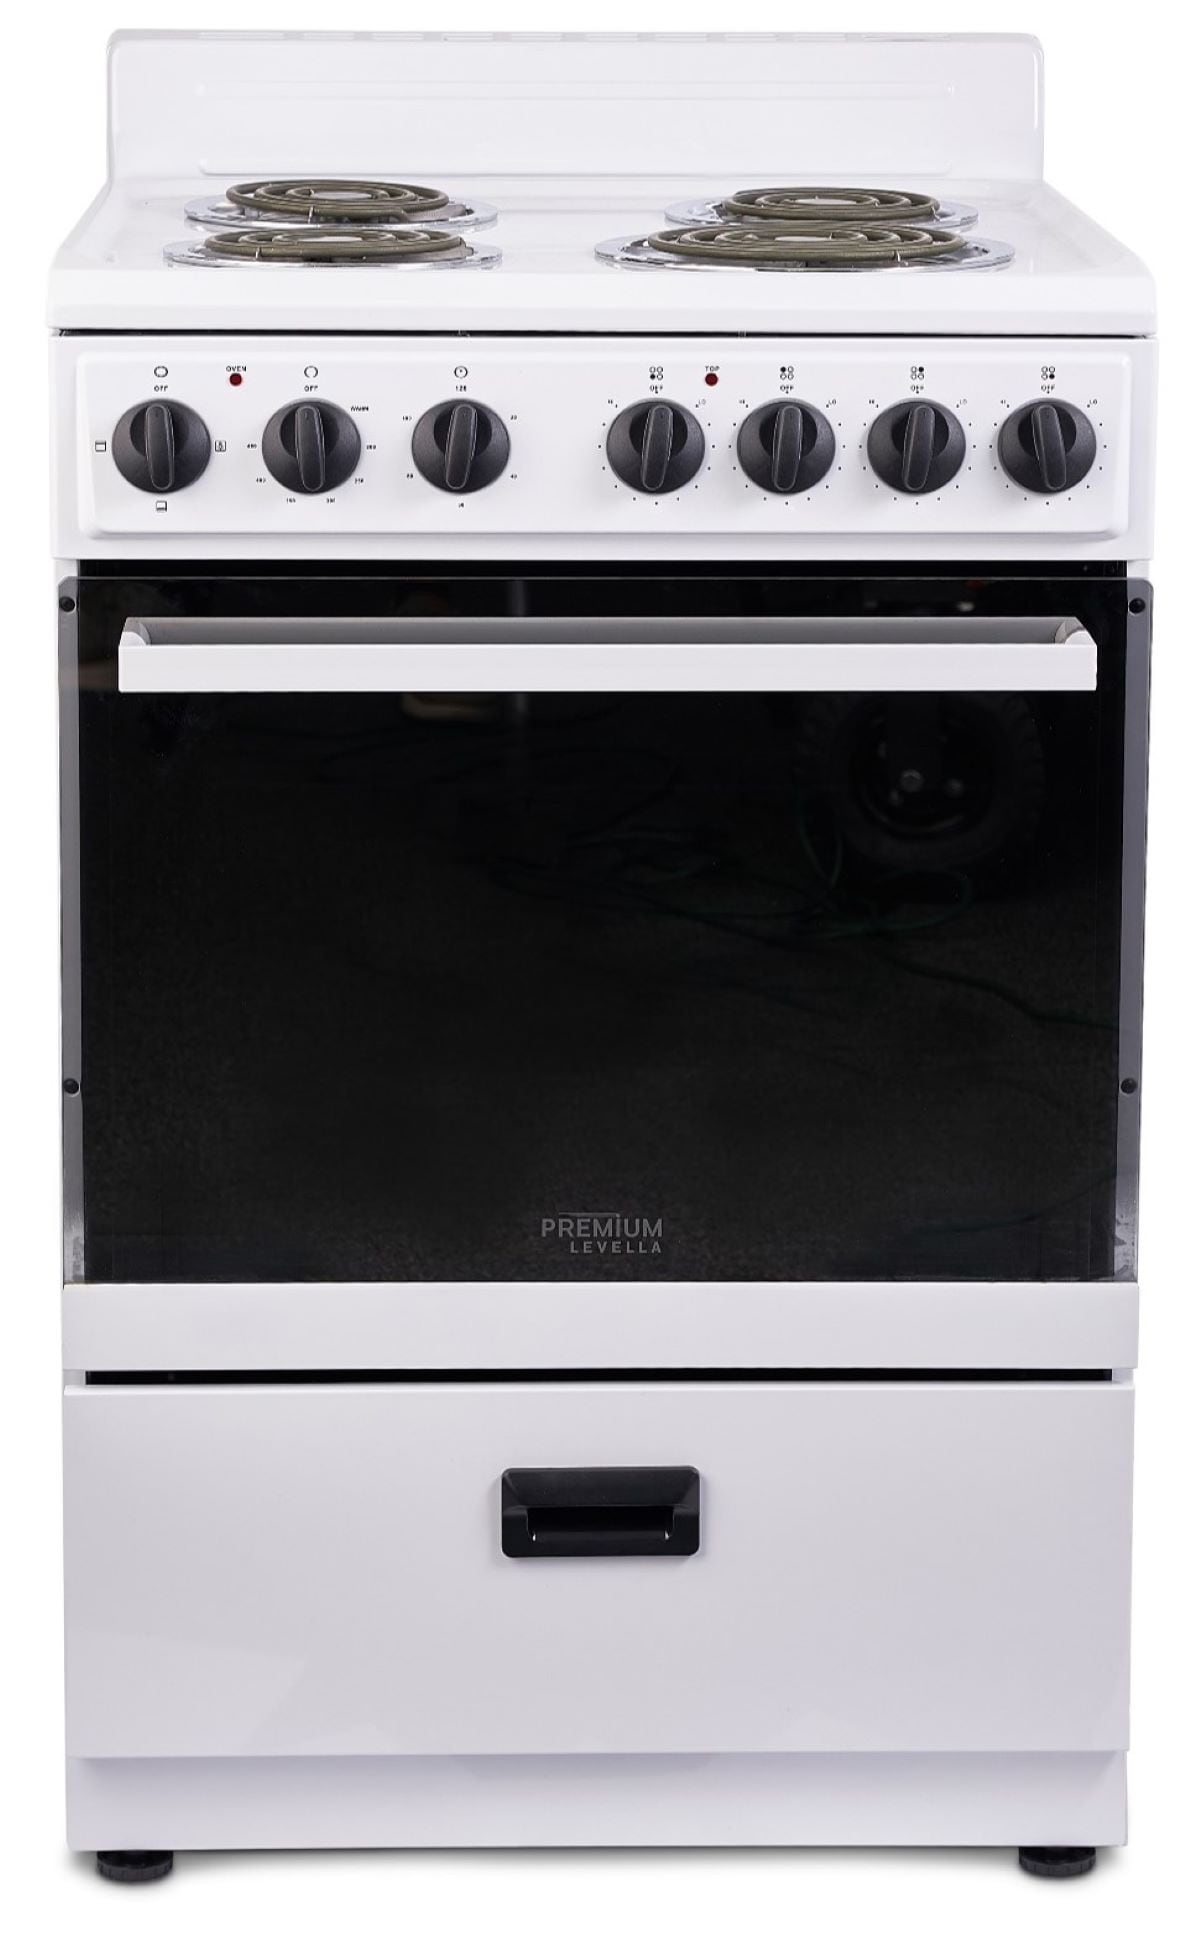 24 in. 2.97 cu. ft. Freestanding Smooth Top Electric Range in White